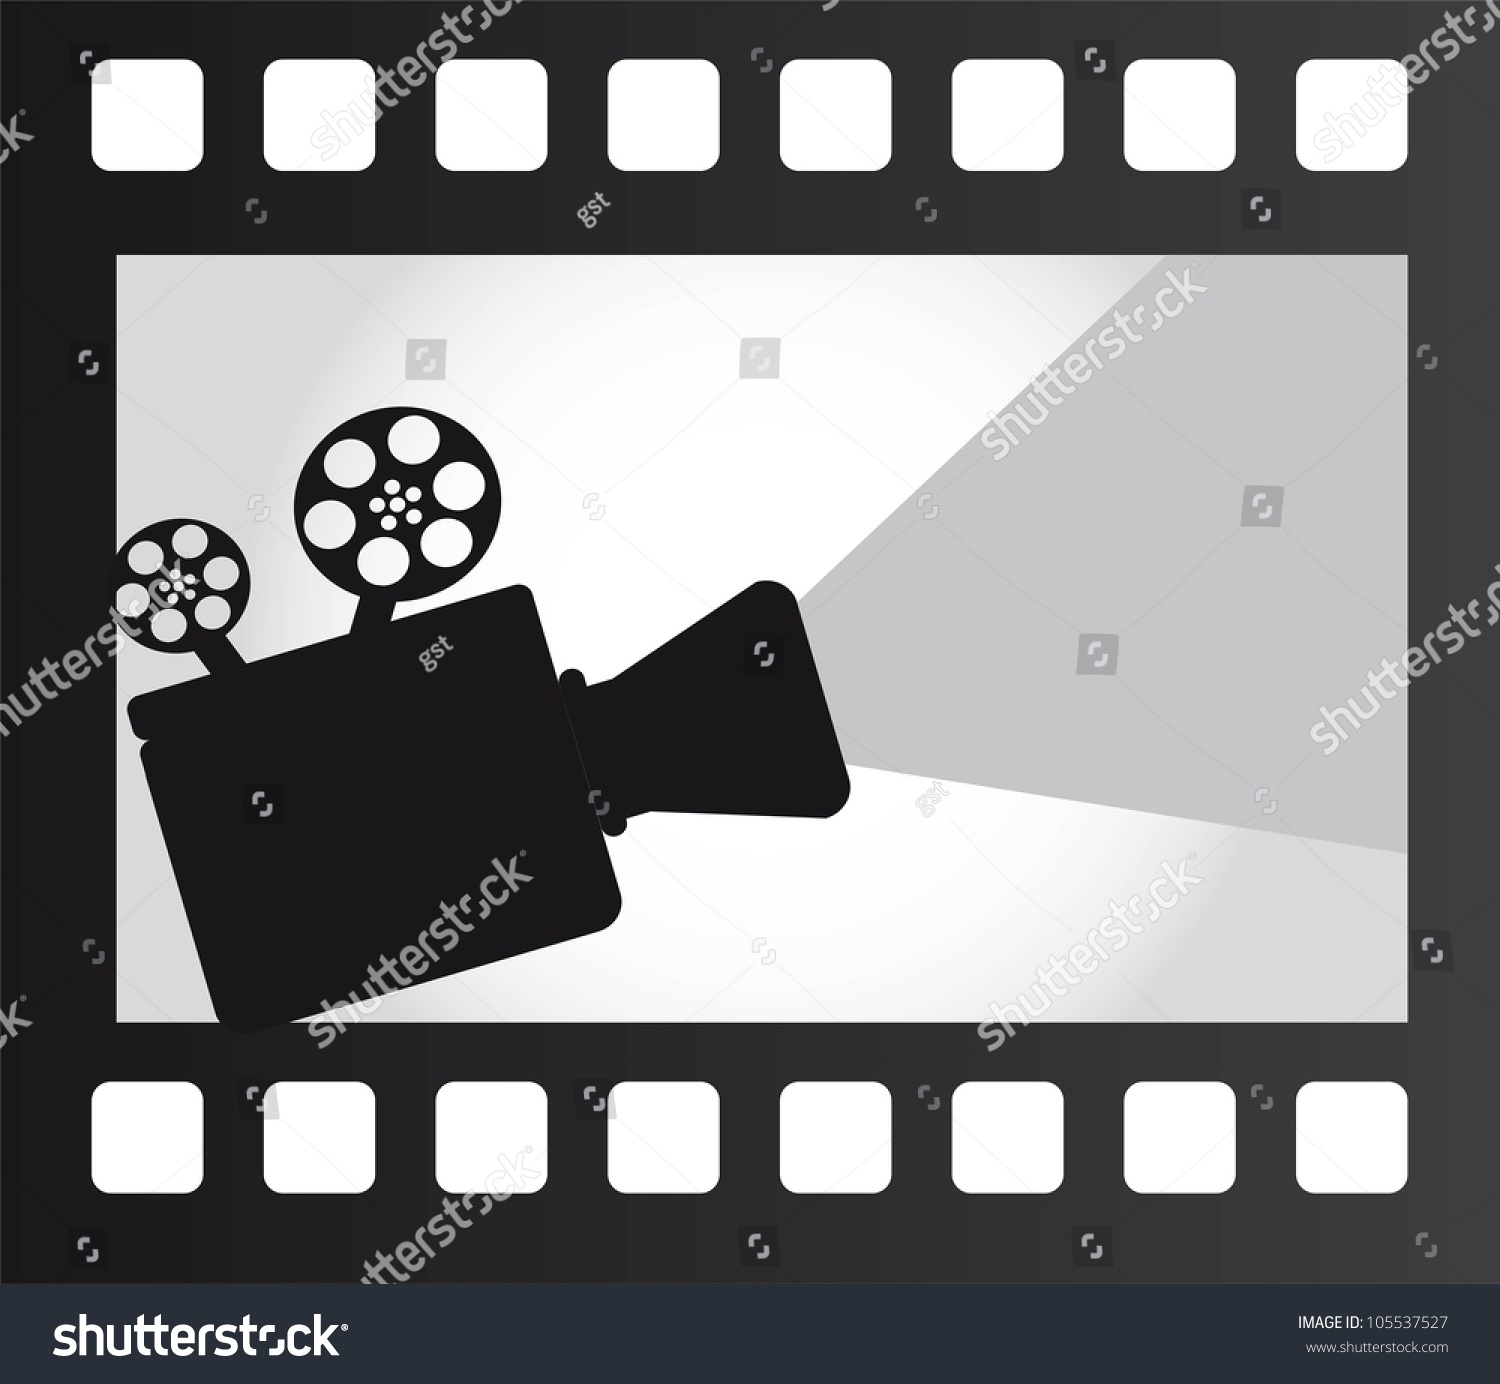 clipart of movie projector - photo #23